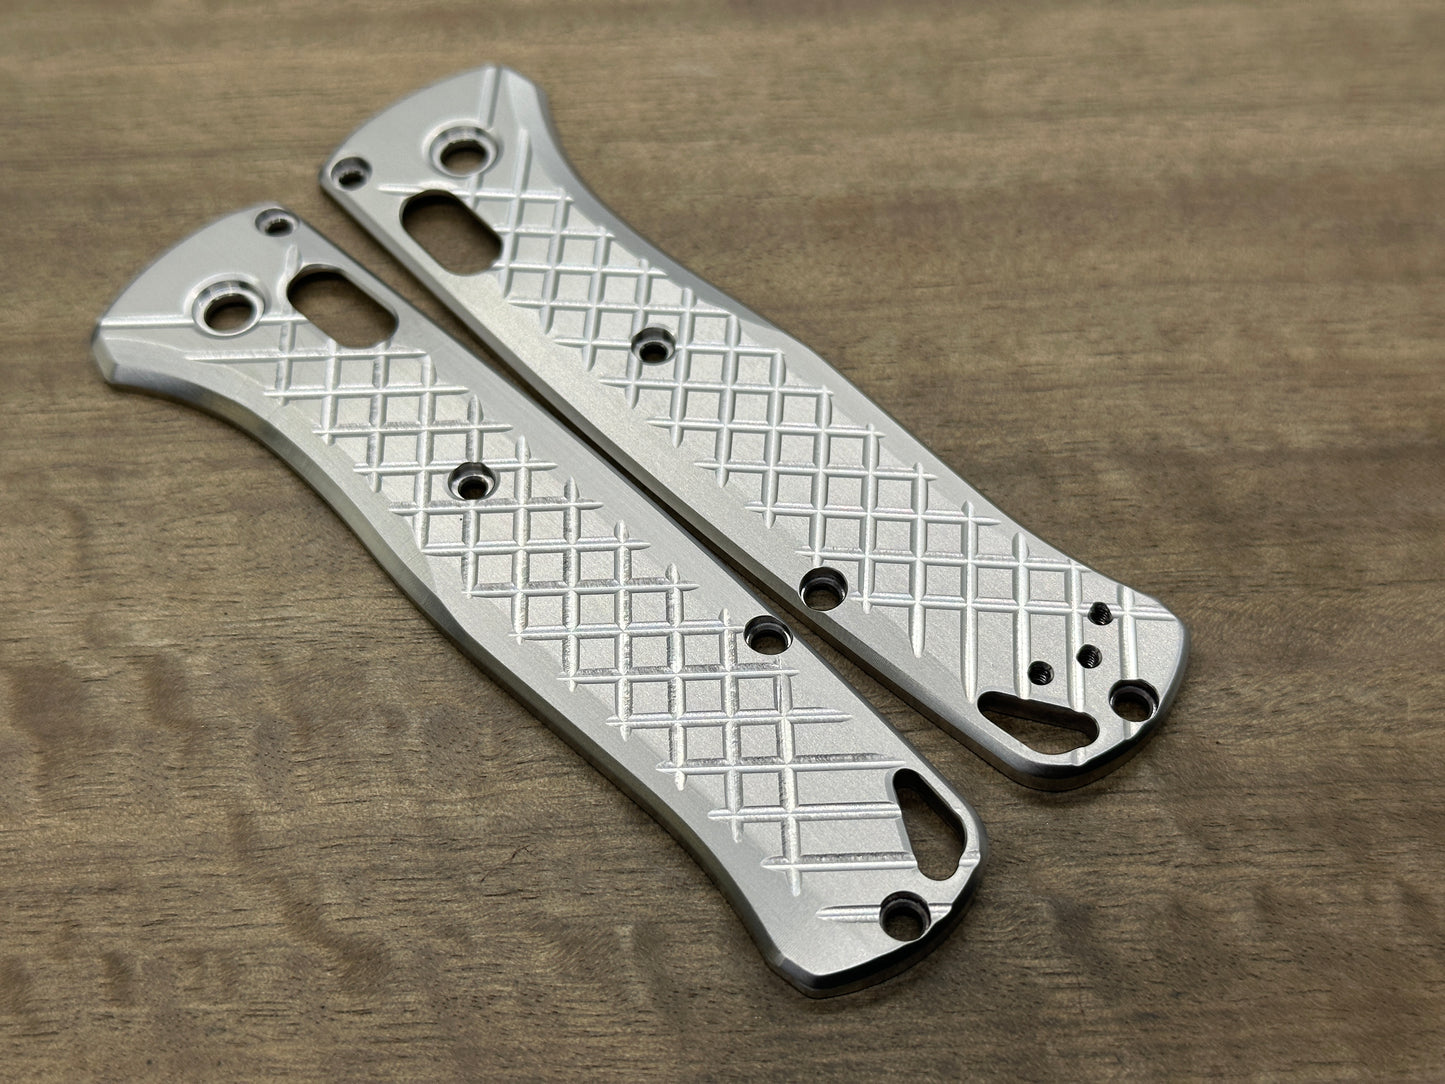 Titanium FRAG Cnc milled Scales for Benchmade Bugout 535